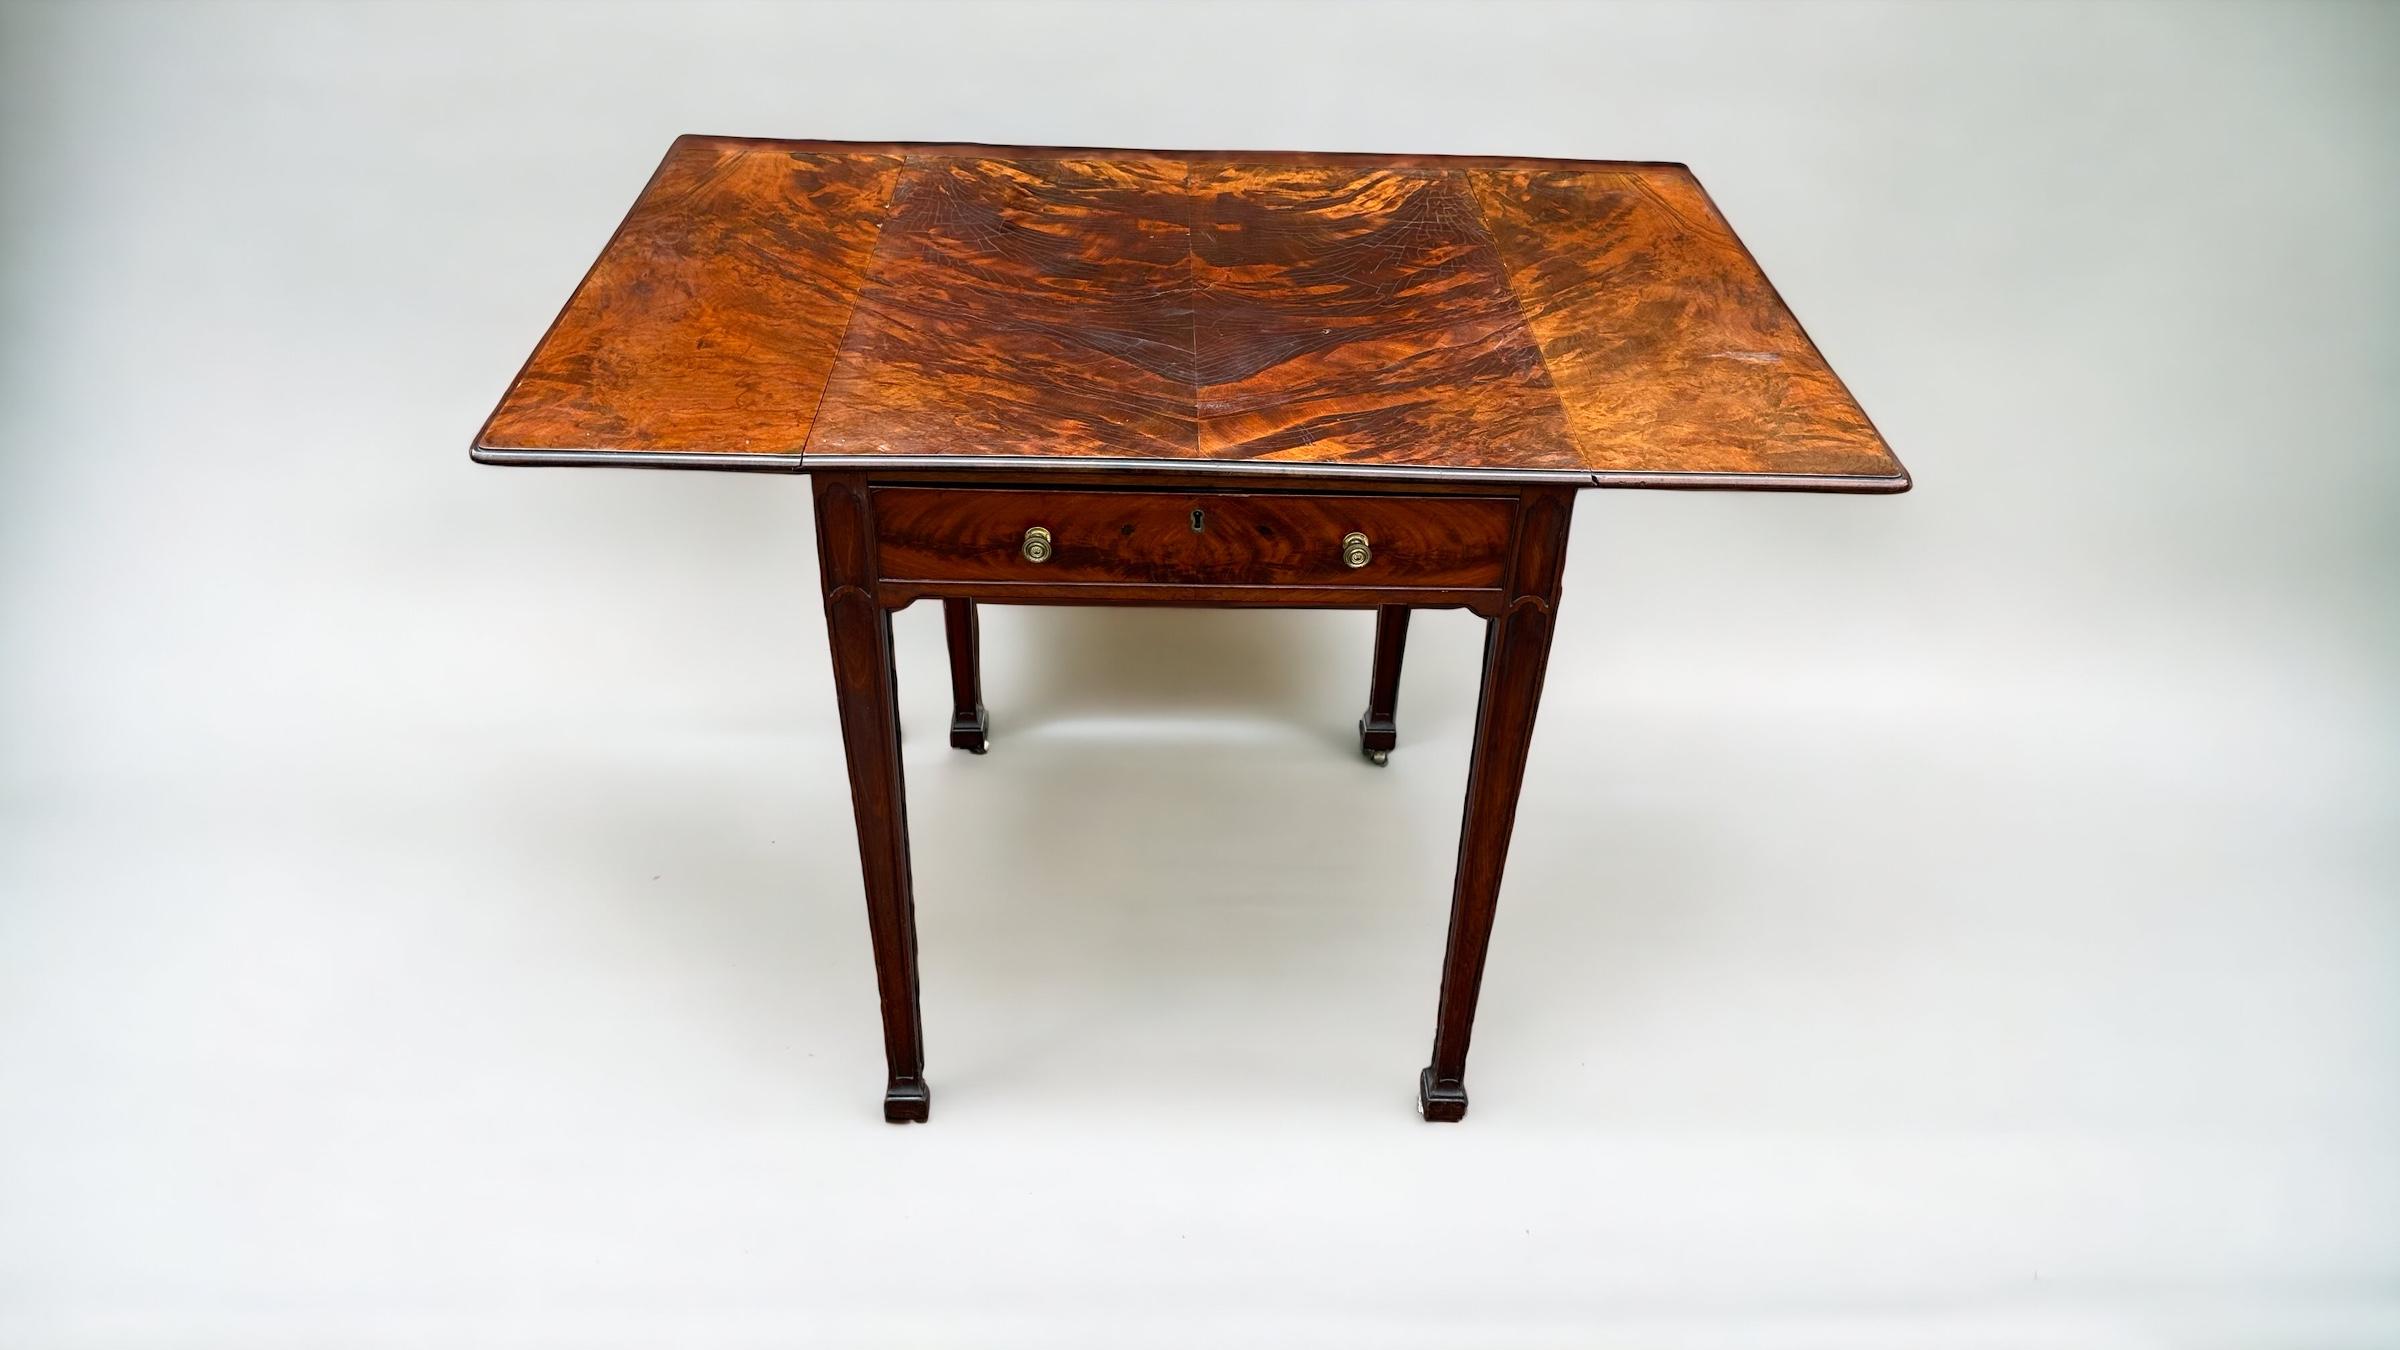 A fine mid 18th Century Chippendale period mahogany Pembroke table.
The top with exquisite & highly figured veneers with rounded corners & thumb moulded edge.
The base with frieze drawer and dummy to opposing side with brass axe head handles typical